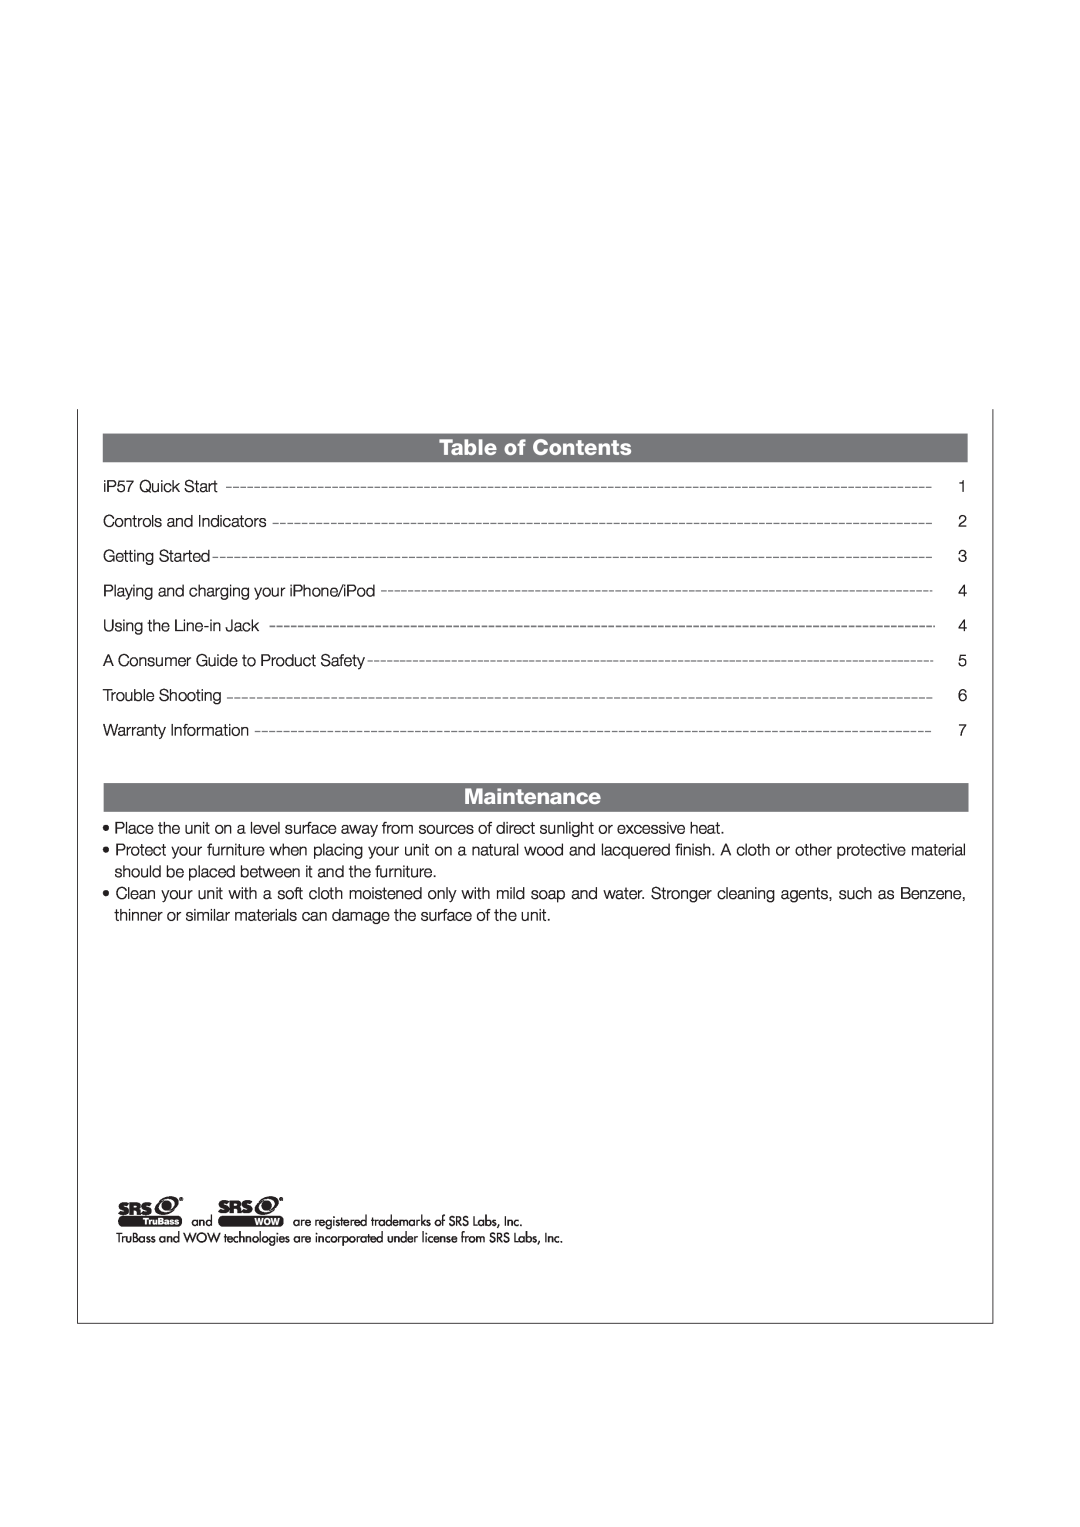 iHome IP57 manual Table ofContents, Maintenance 